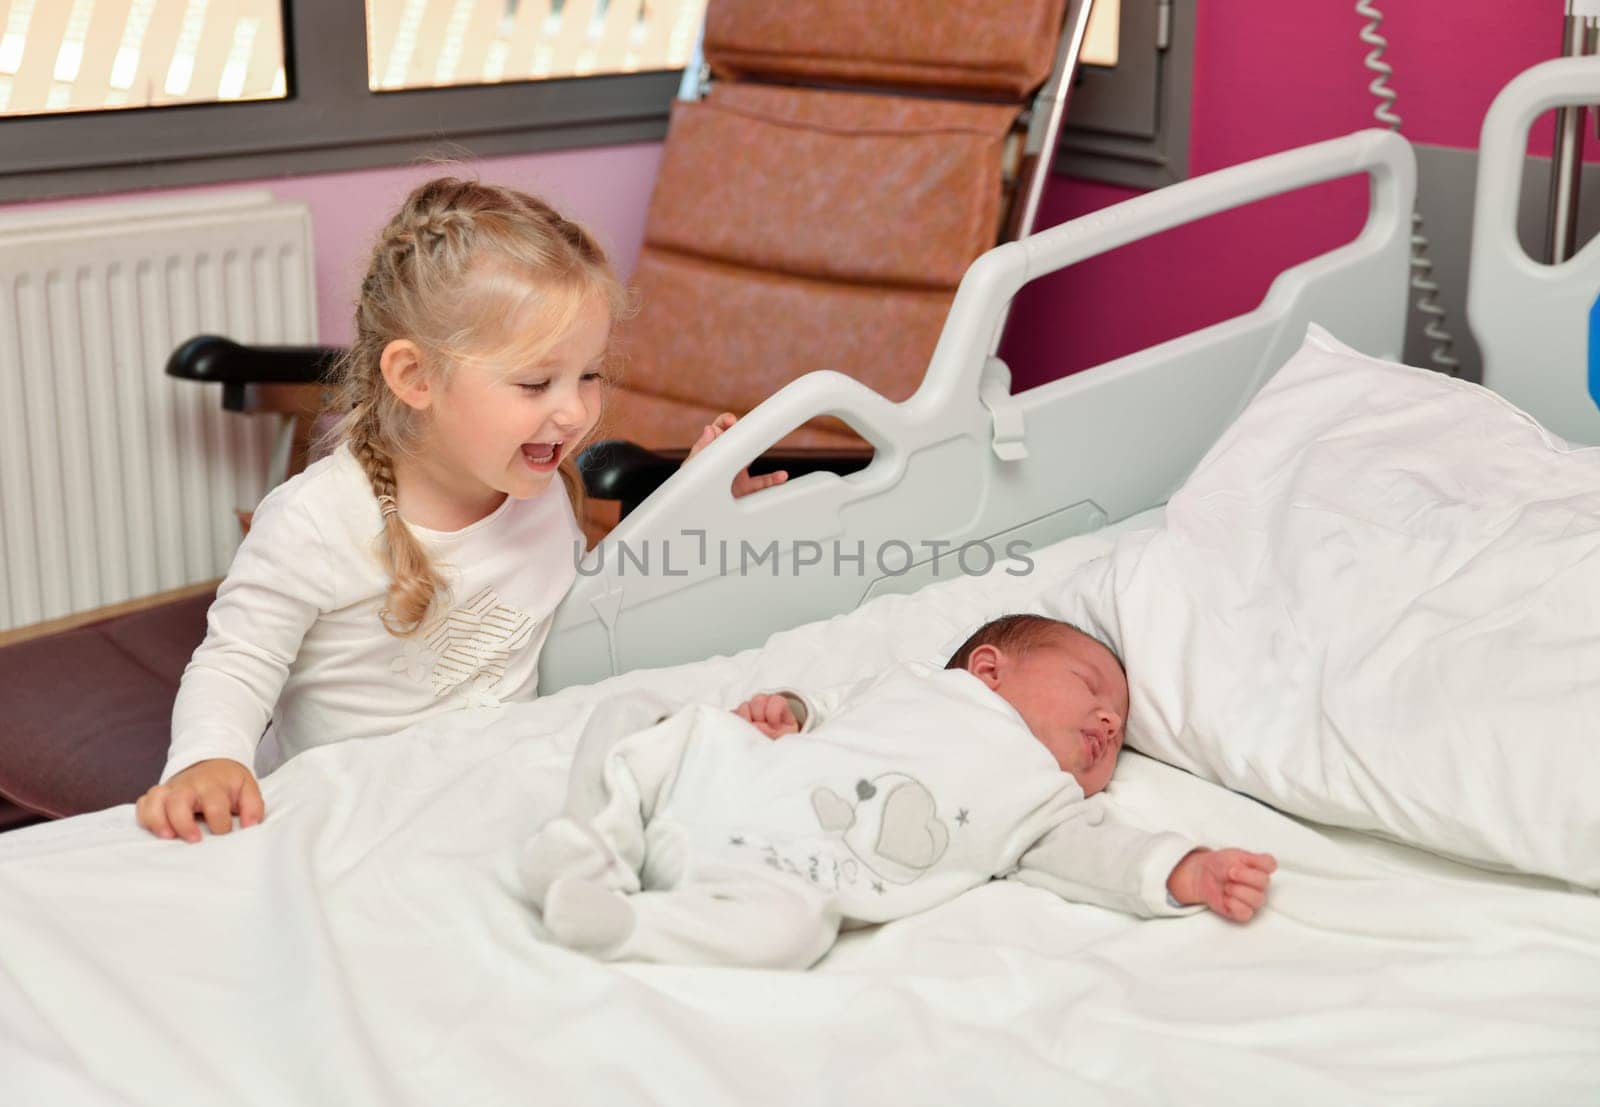 First acquaintance between a sister and a newborn baby in the hospital ward by Godi